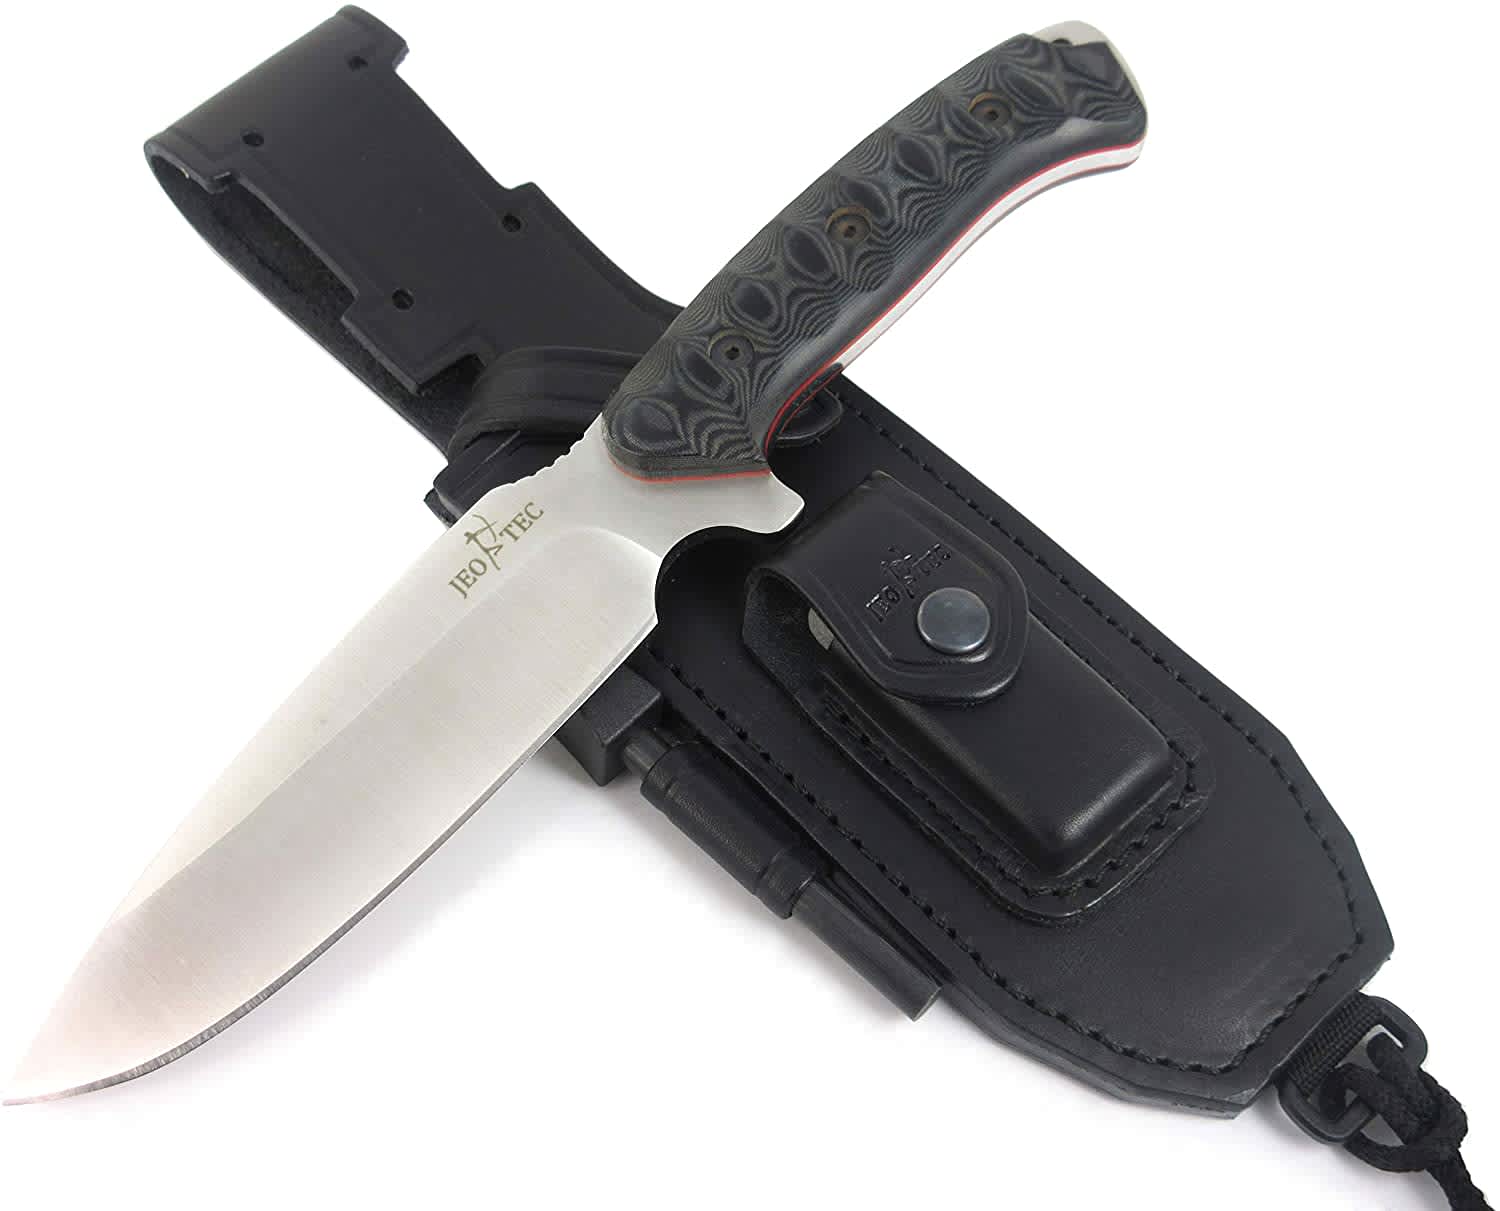 JEO-TEC Nº15 Bushcraft Knife - Too Cool Not to Want